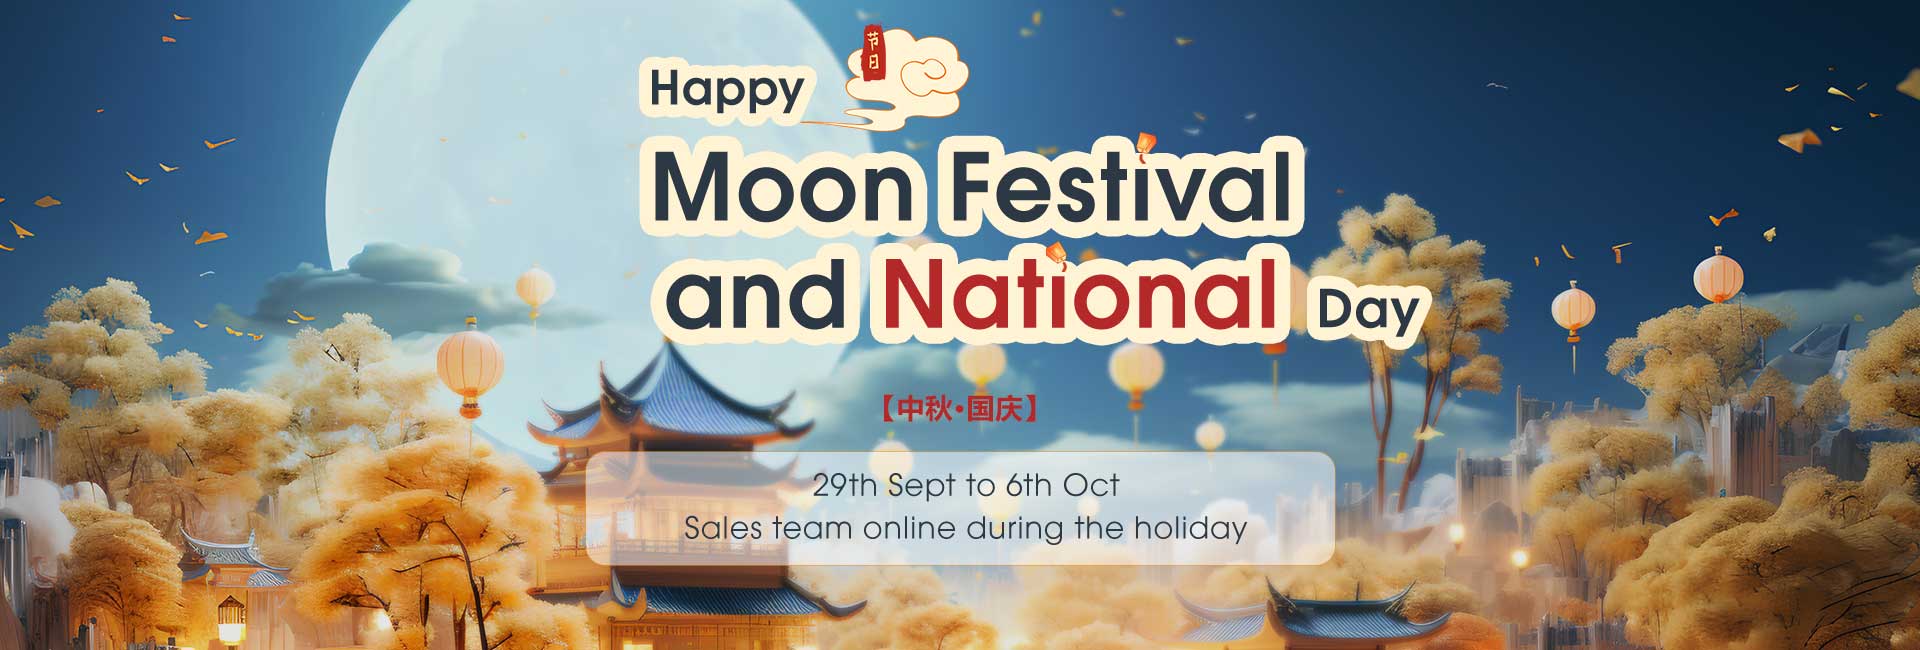 Suzhou Image Technology wish you happy moon festival and national day